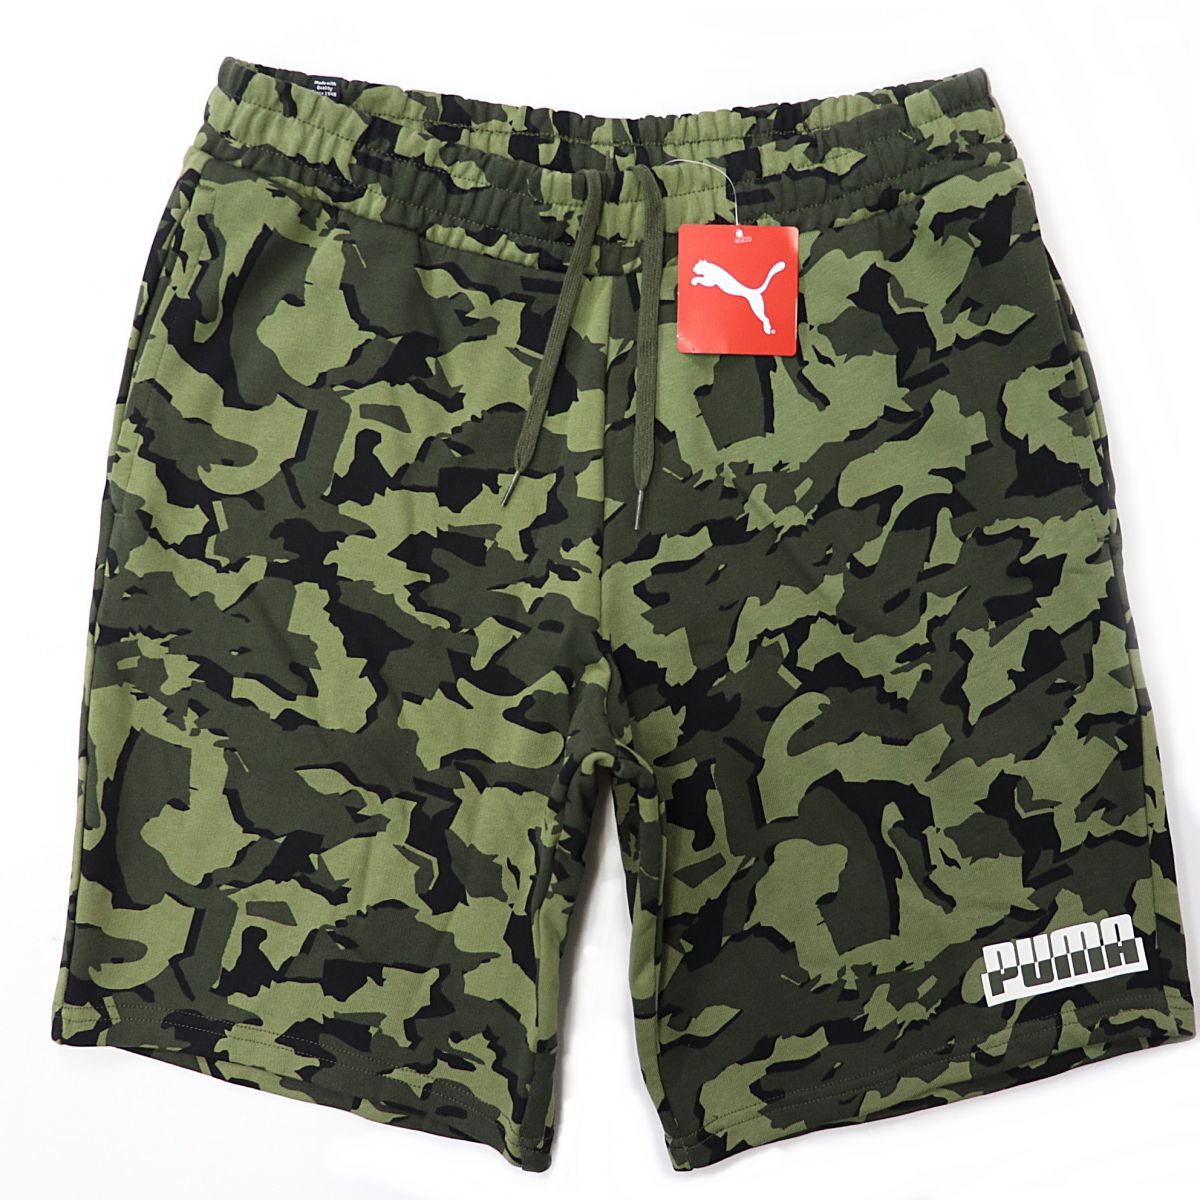 * Puma PUMA new goods men's comfortable sweat casual camouflage camouflage duck shorts shorts pants [531501-70-M] US four 0 *QWER*